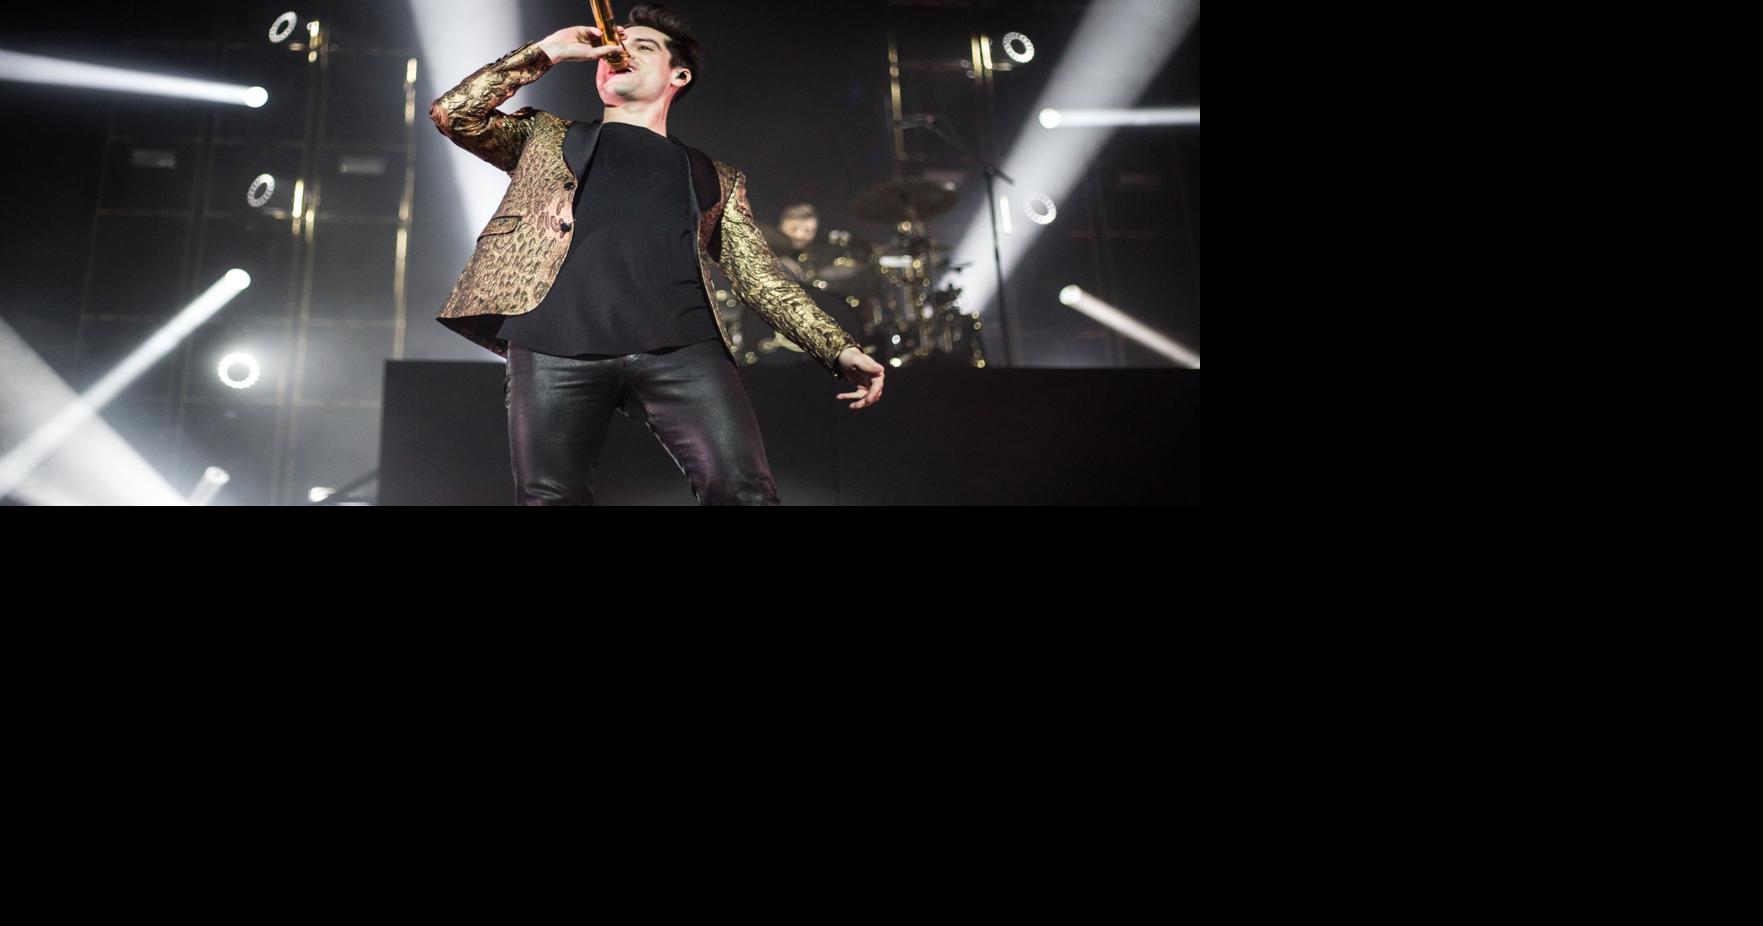 Panic! At The Disco has memorable show at the Baxter Arena | Culture |  